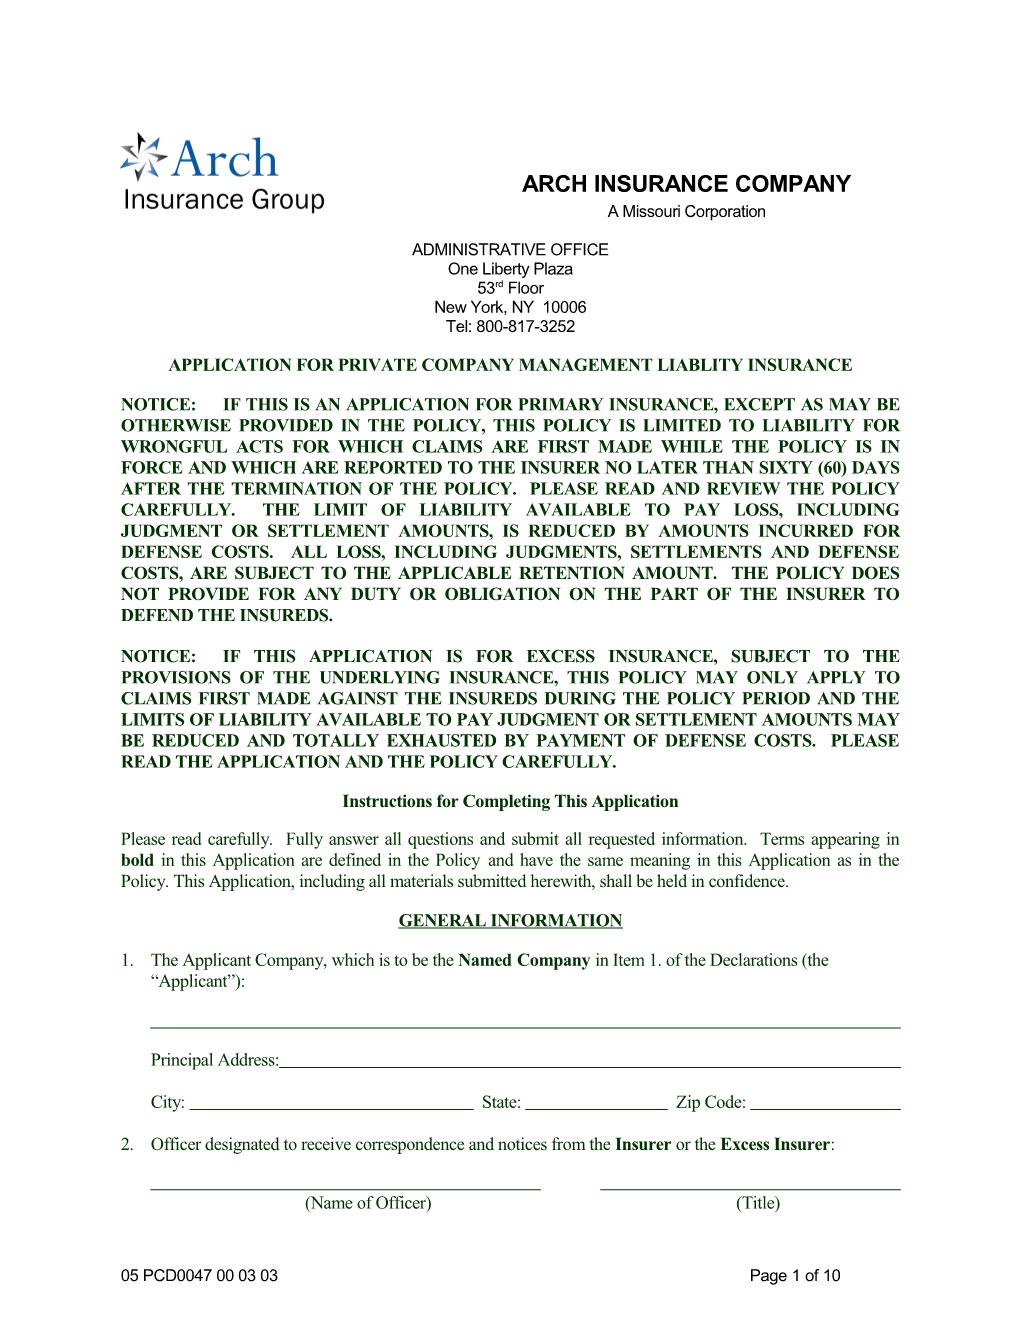 Application for Private Company Management Liablity Insurance